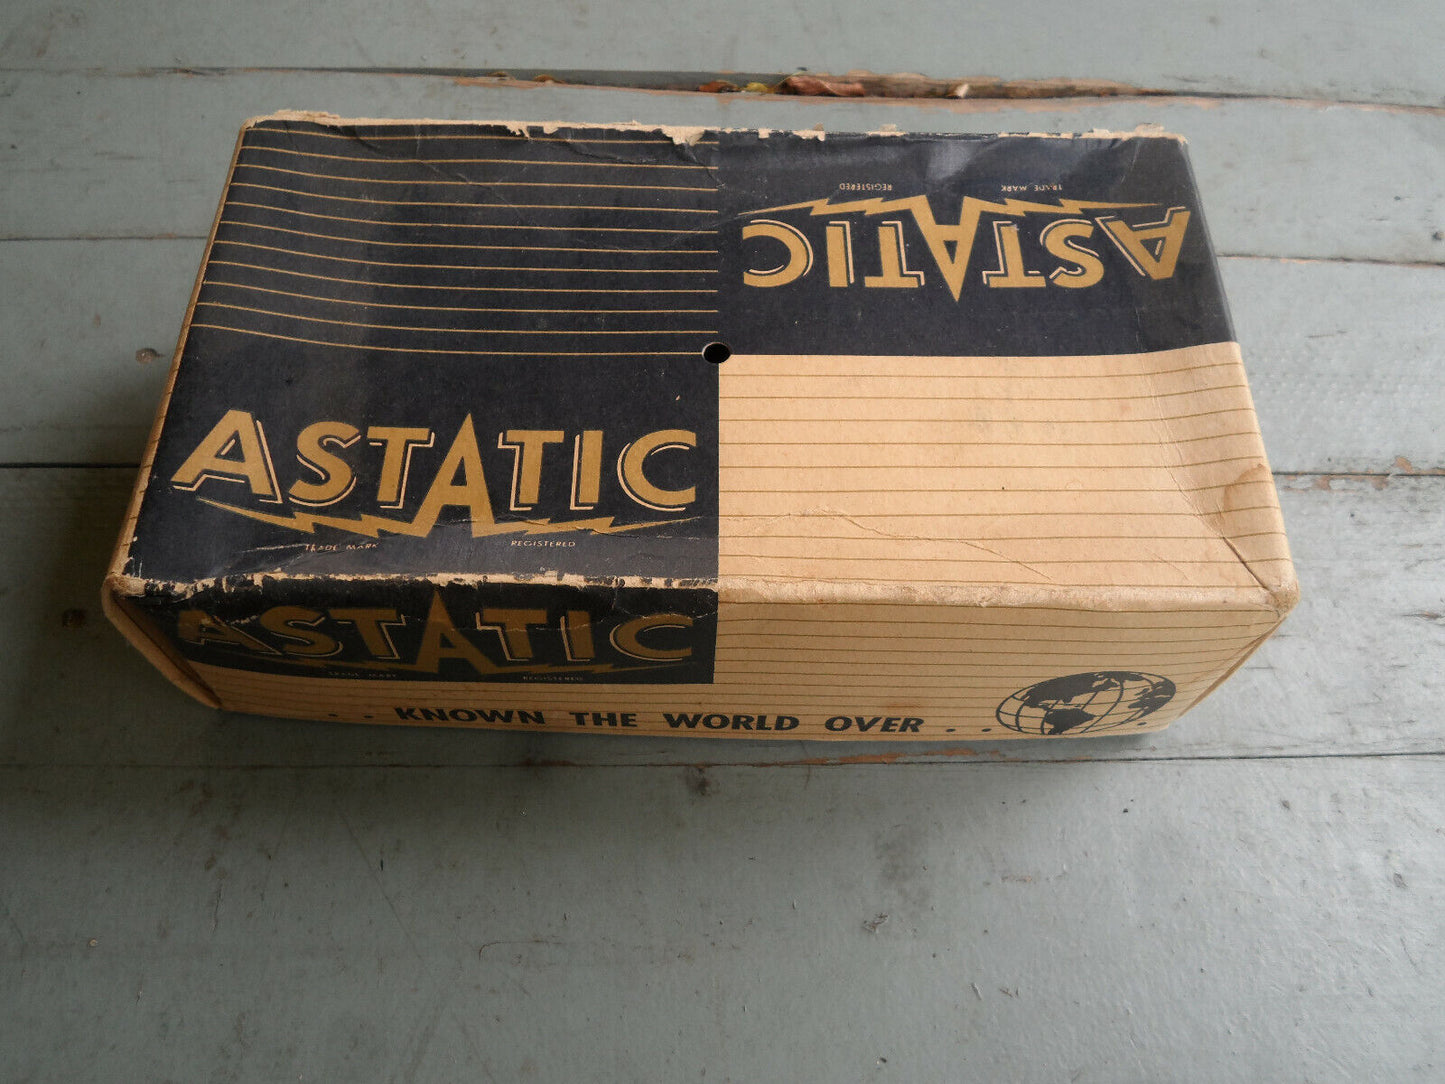 Vintage New Old Stock 1950's Astatic DN-50 Microphone w/cable Box (Harp)